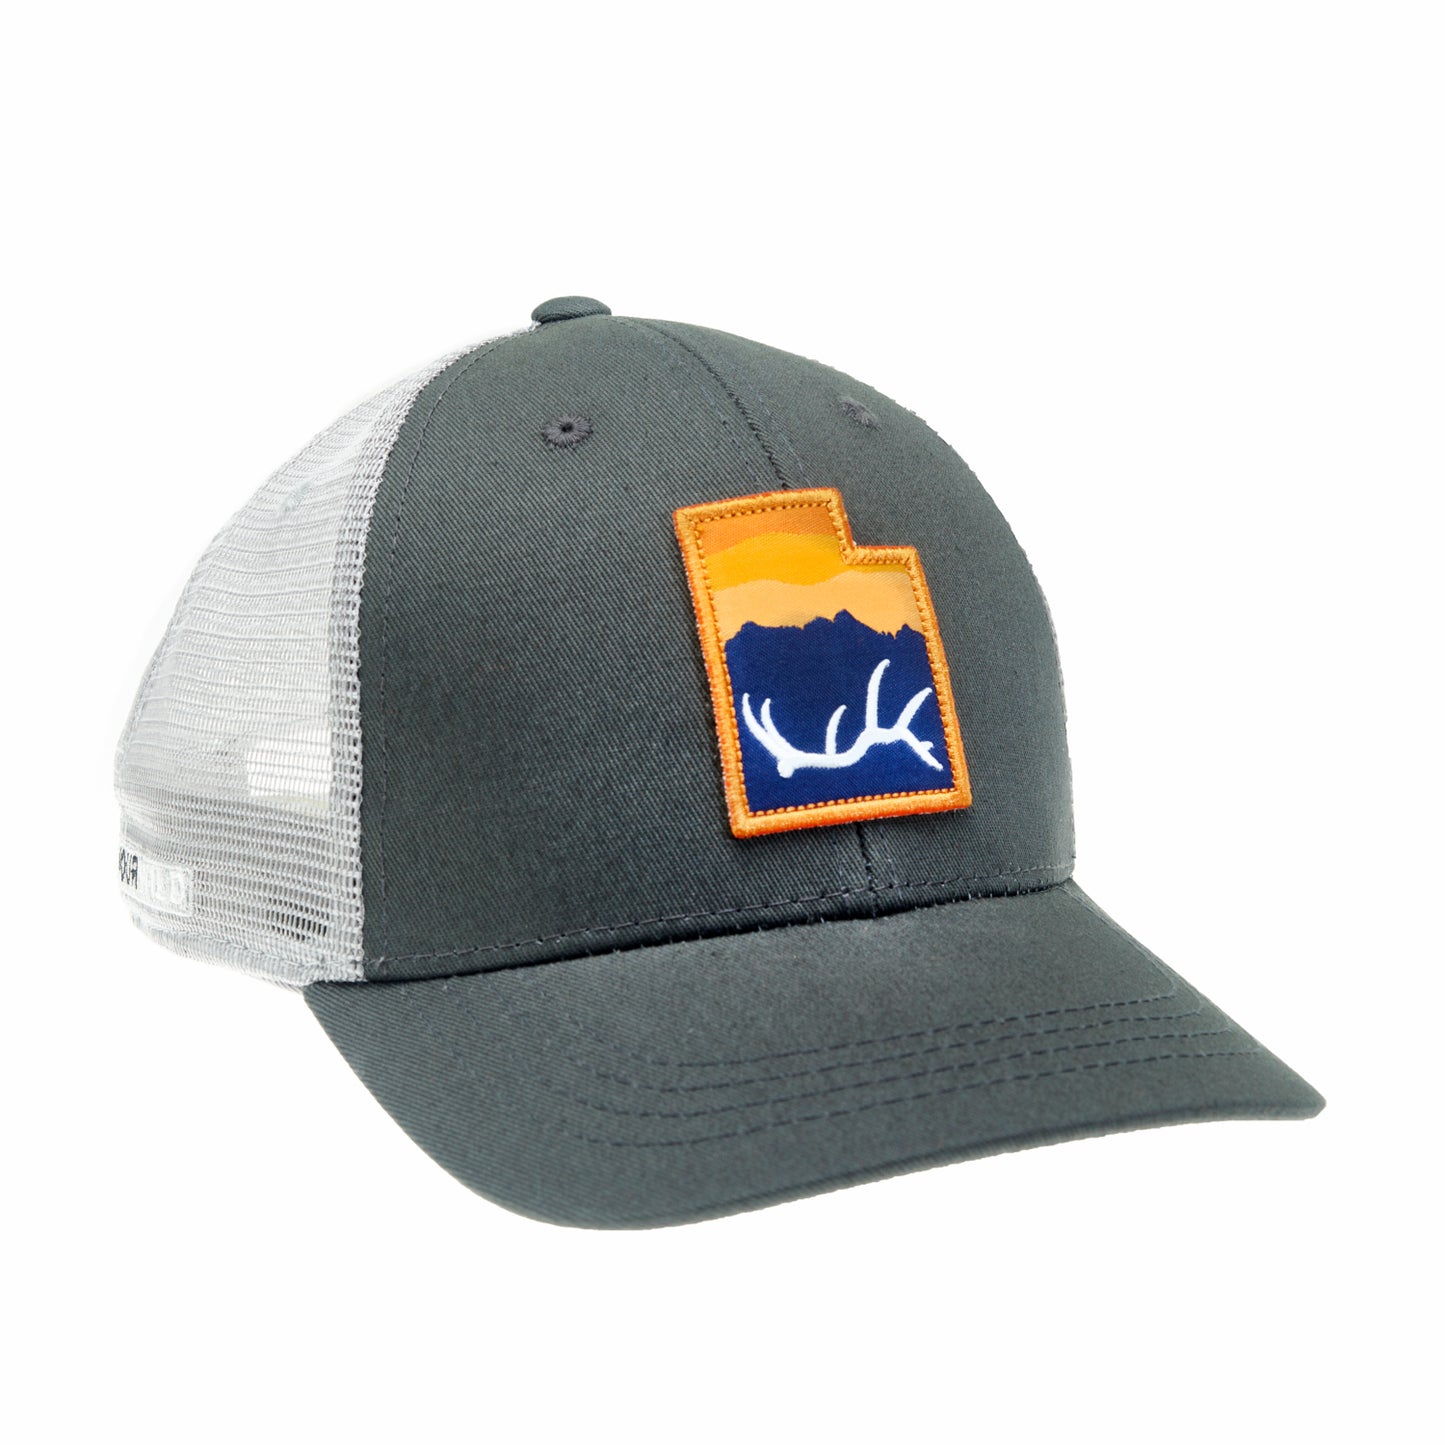 A hat with gray mesh and gray fabric has a patch in the shape of utah with an elk antler in front of a mountain and sunset